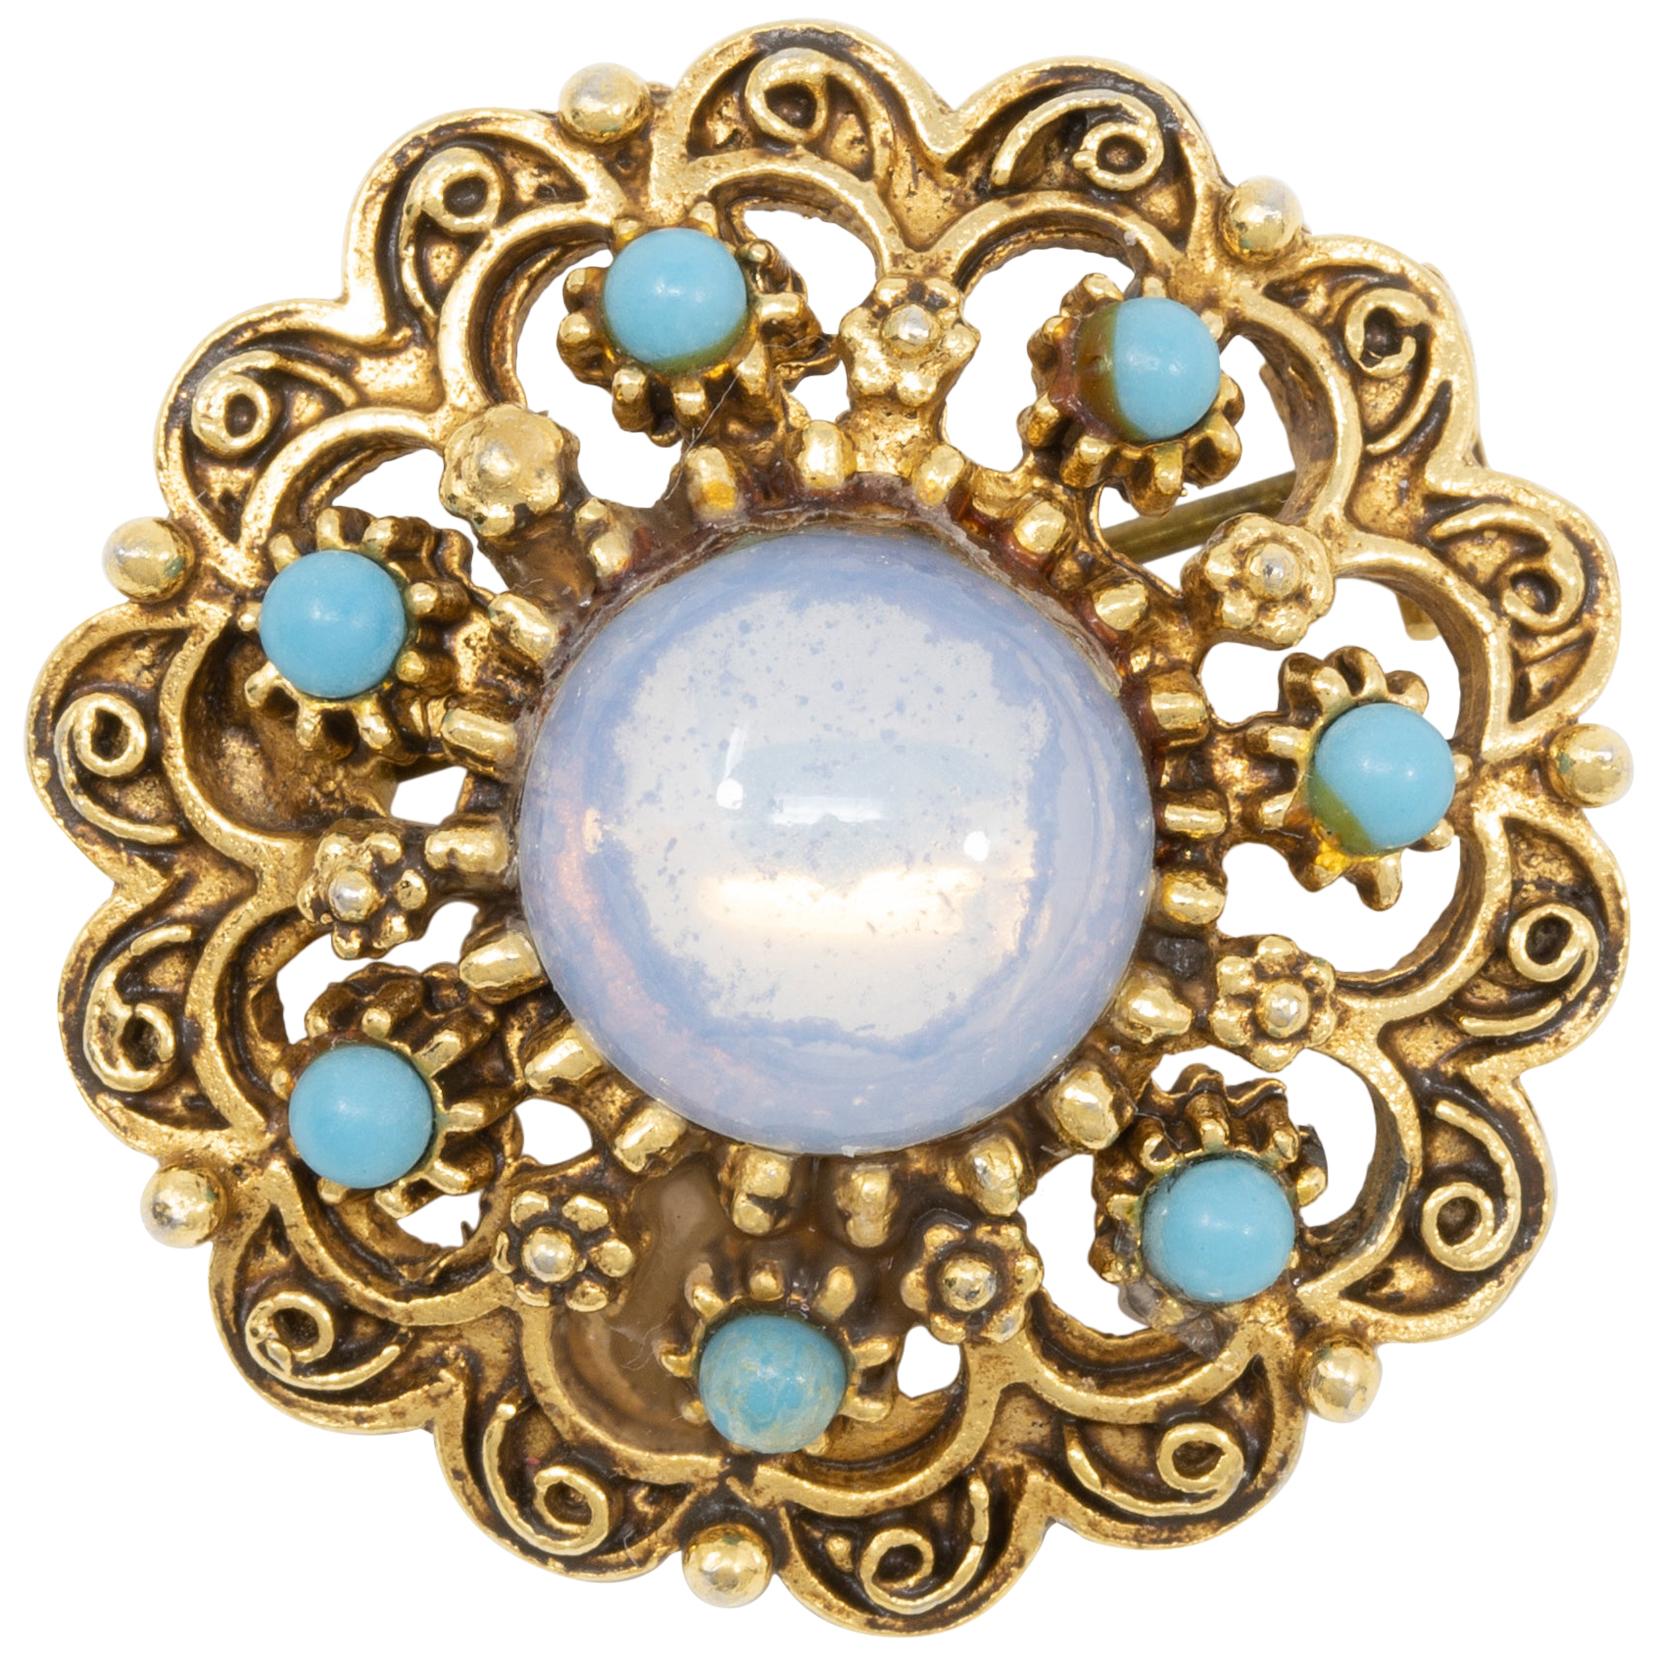 Florenza Gold Victorian Revival Pin Brooch with Moonglow and Turquoise Cabochons